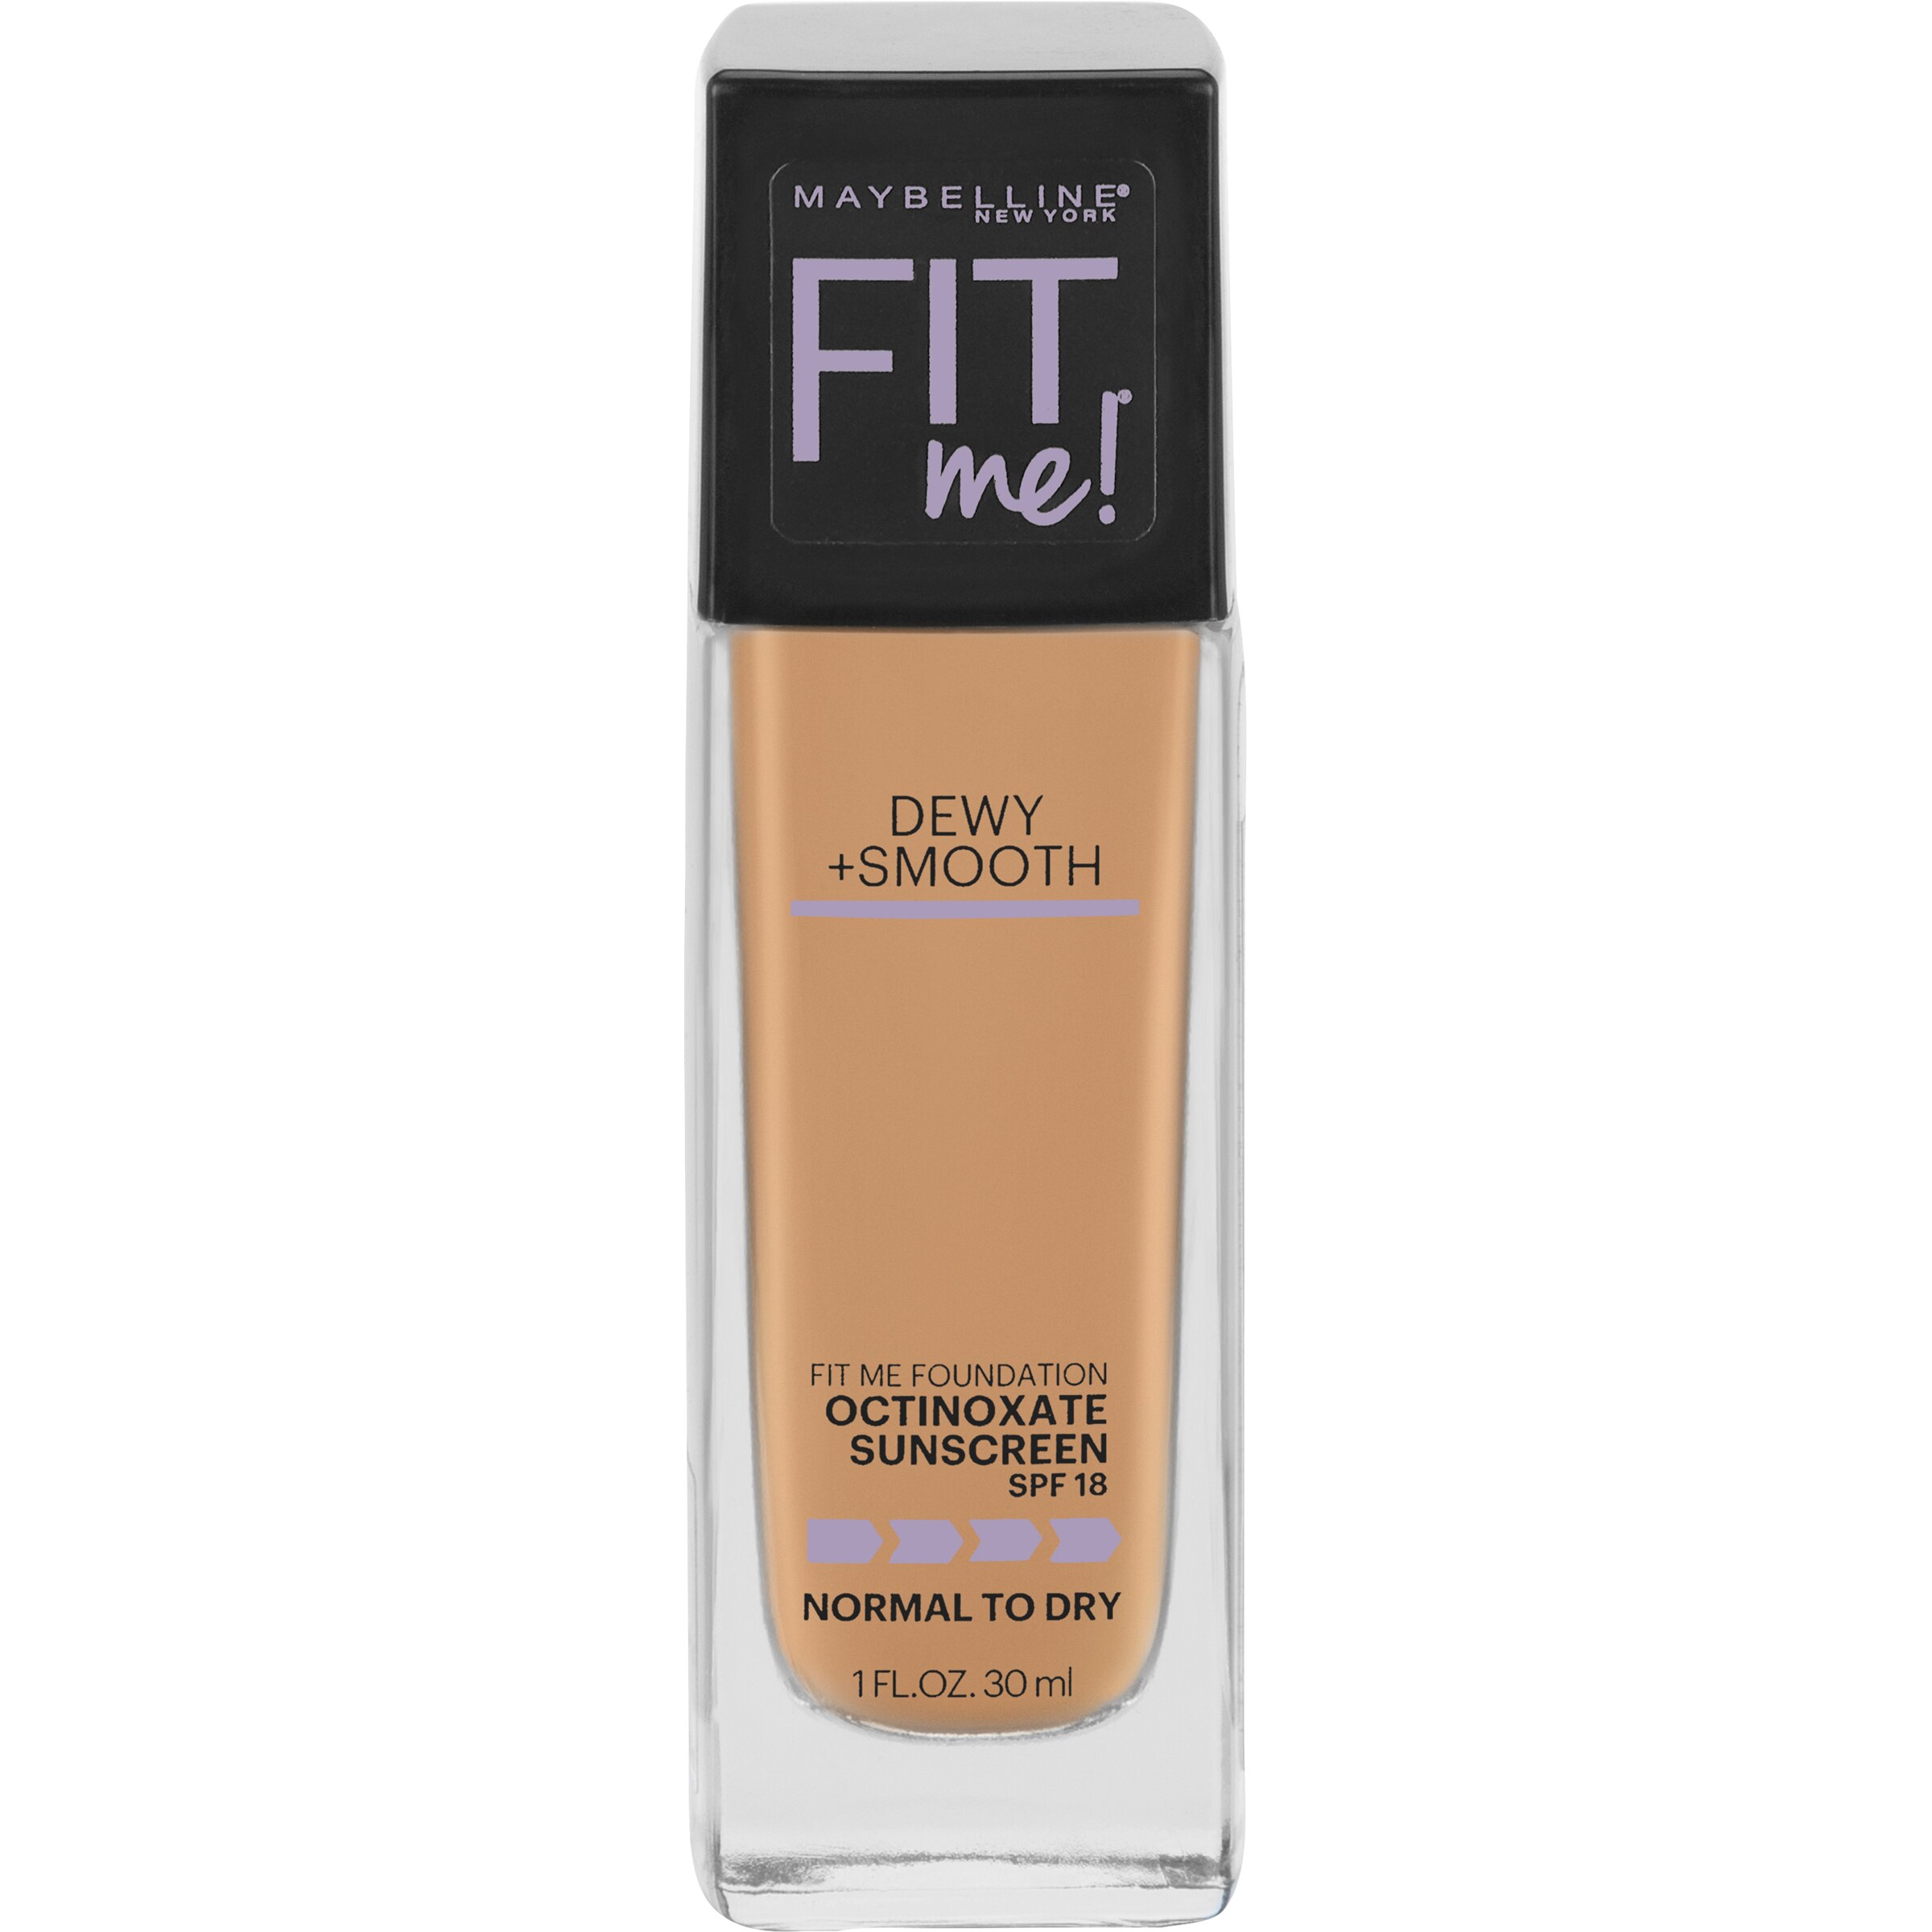 Maybelline Fit Me! Dewy + Smooth Foundation